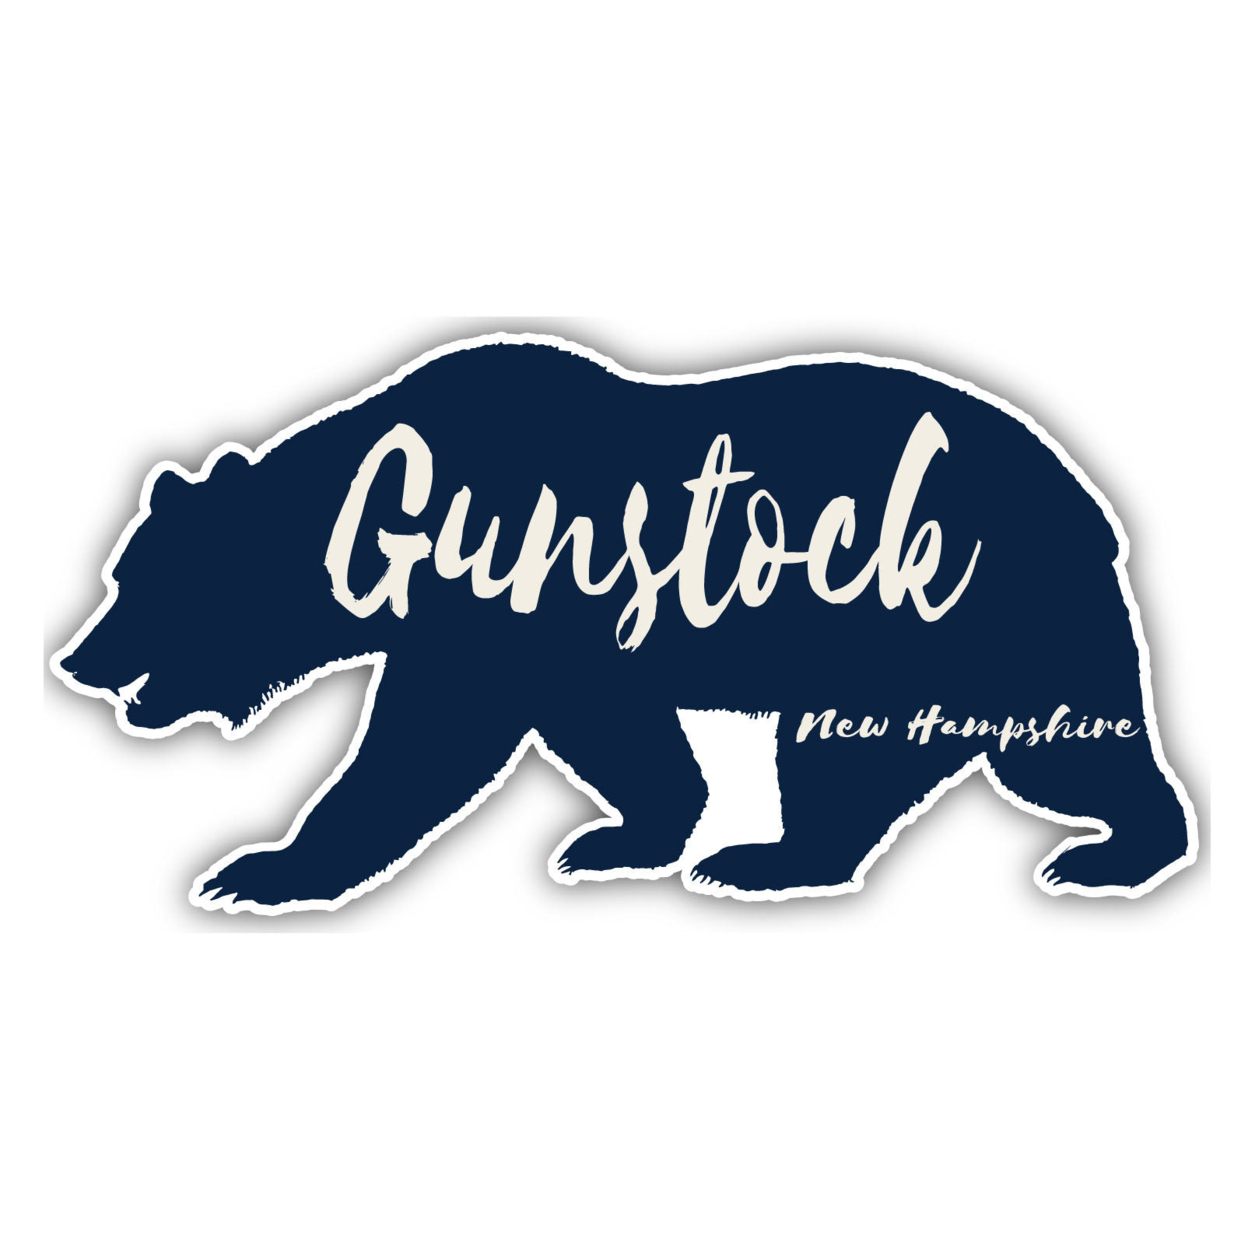 Gunstock New Hampshire Souvenir Decorative Stickers (Choose Theme And Size) - 4-Pack, 4-Inch, Bear